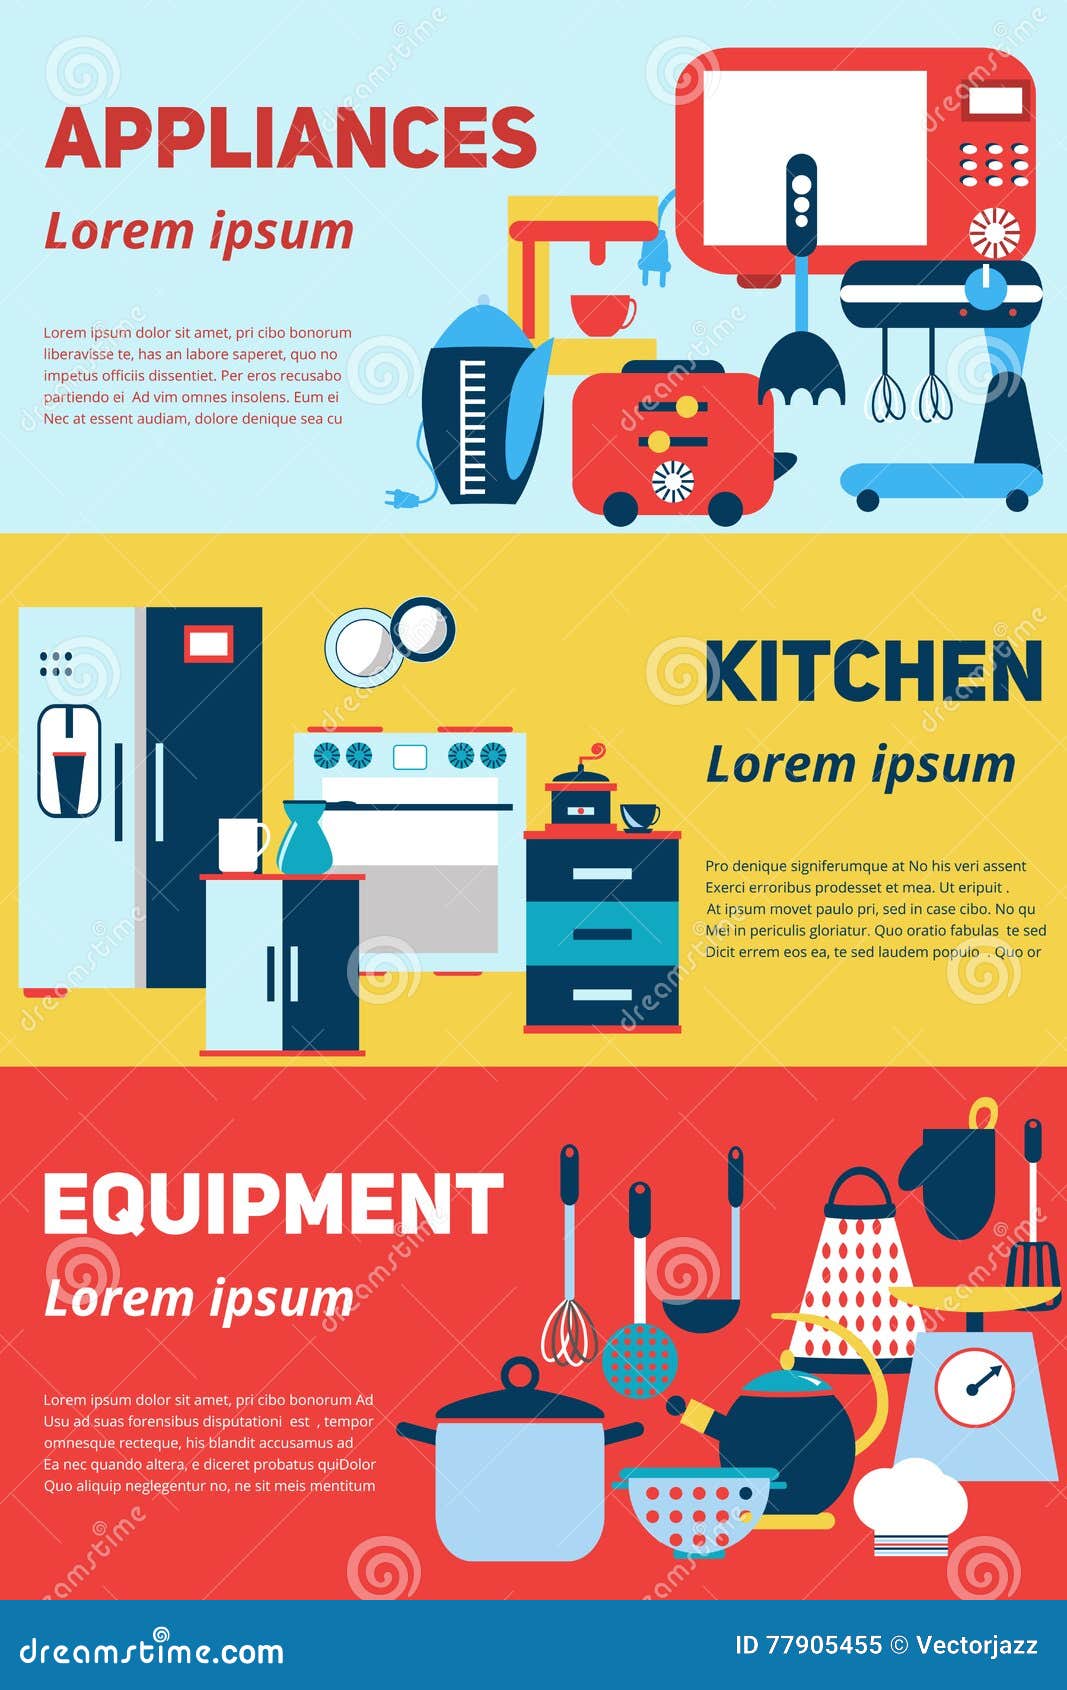 Kitchen Appliances And Equipment Flat Banner Set With Isolated Illustration For Sales And Advertisingorporate Design Stock Illustration Illustration Of Implements Isolated 77905455